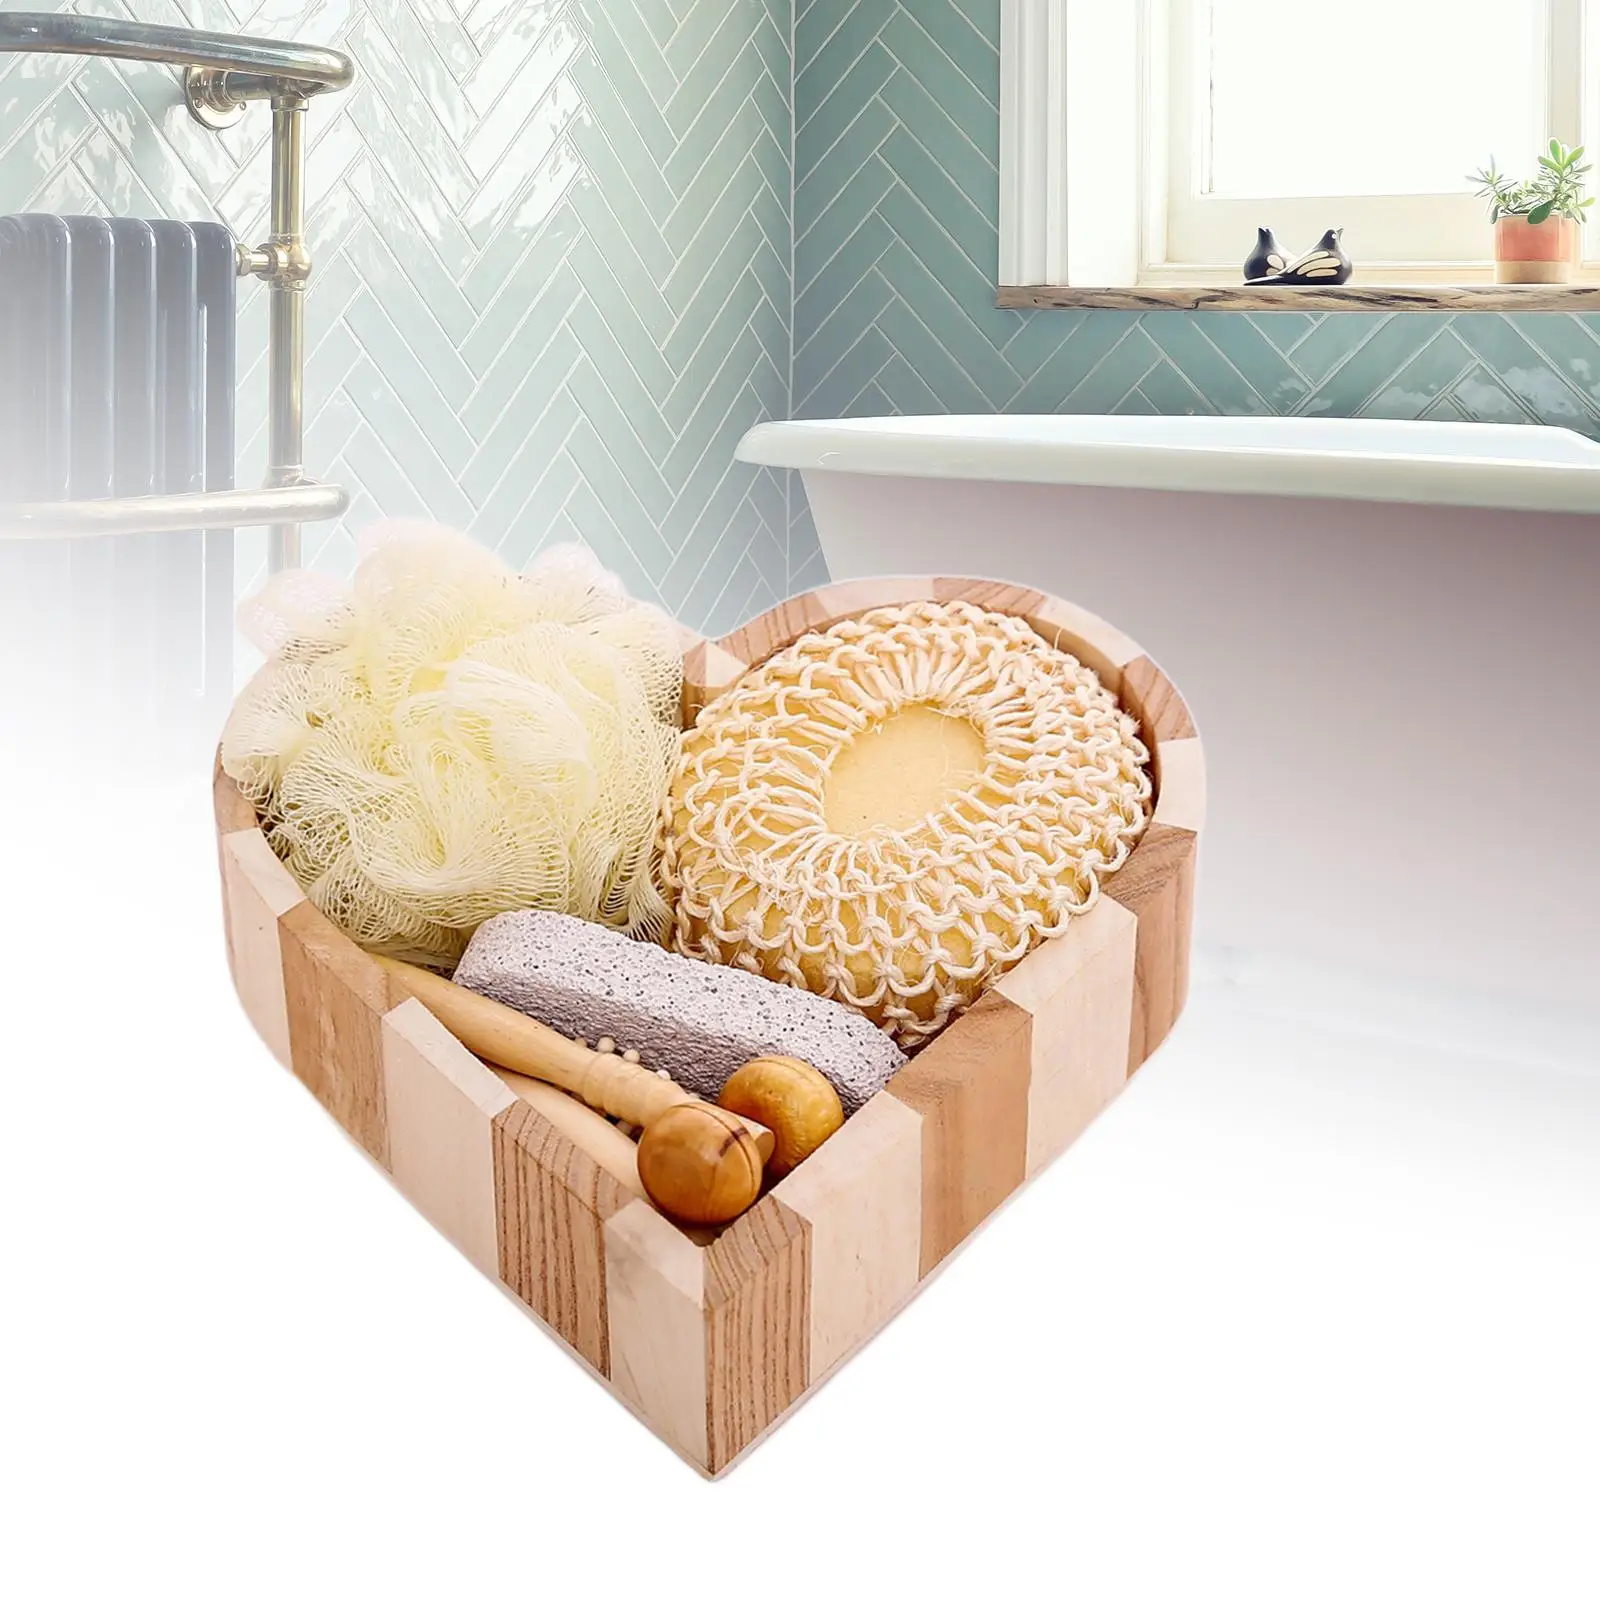 5 Pieces Bath Accessories Set Pumice Stone Hair Brush Sponge Ball in Heart Wooden Box for Body and Foot SPA Women Man Gift